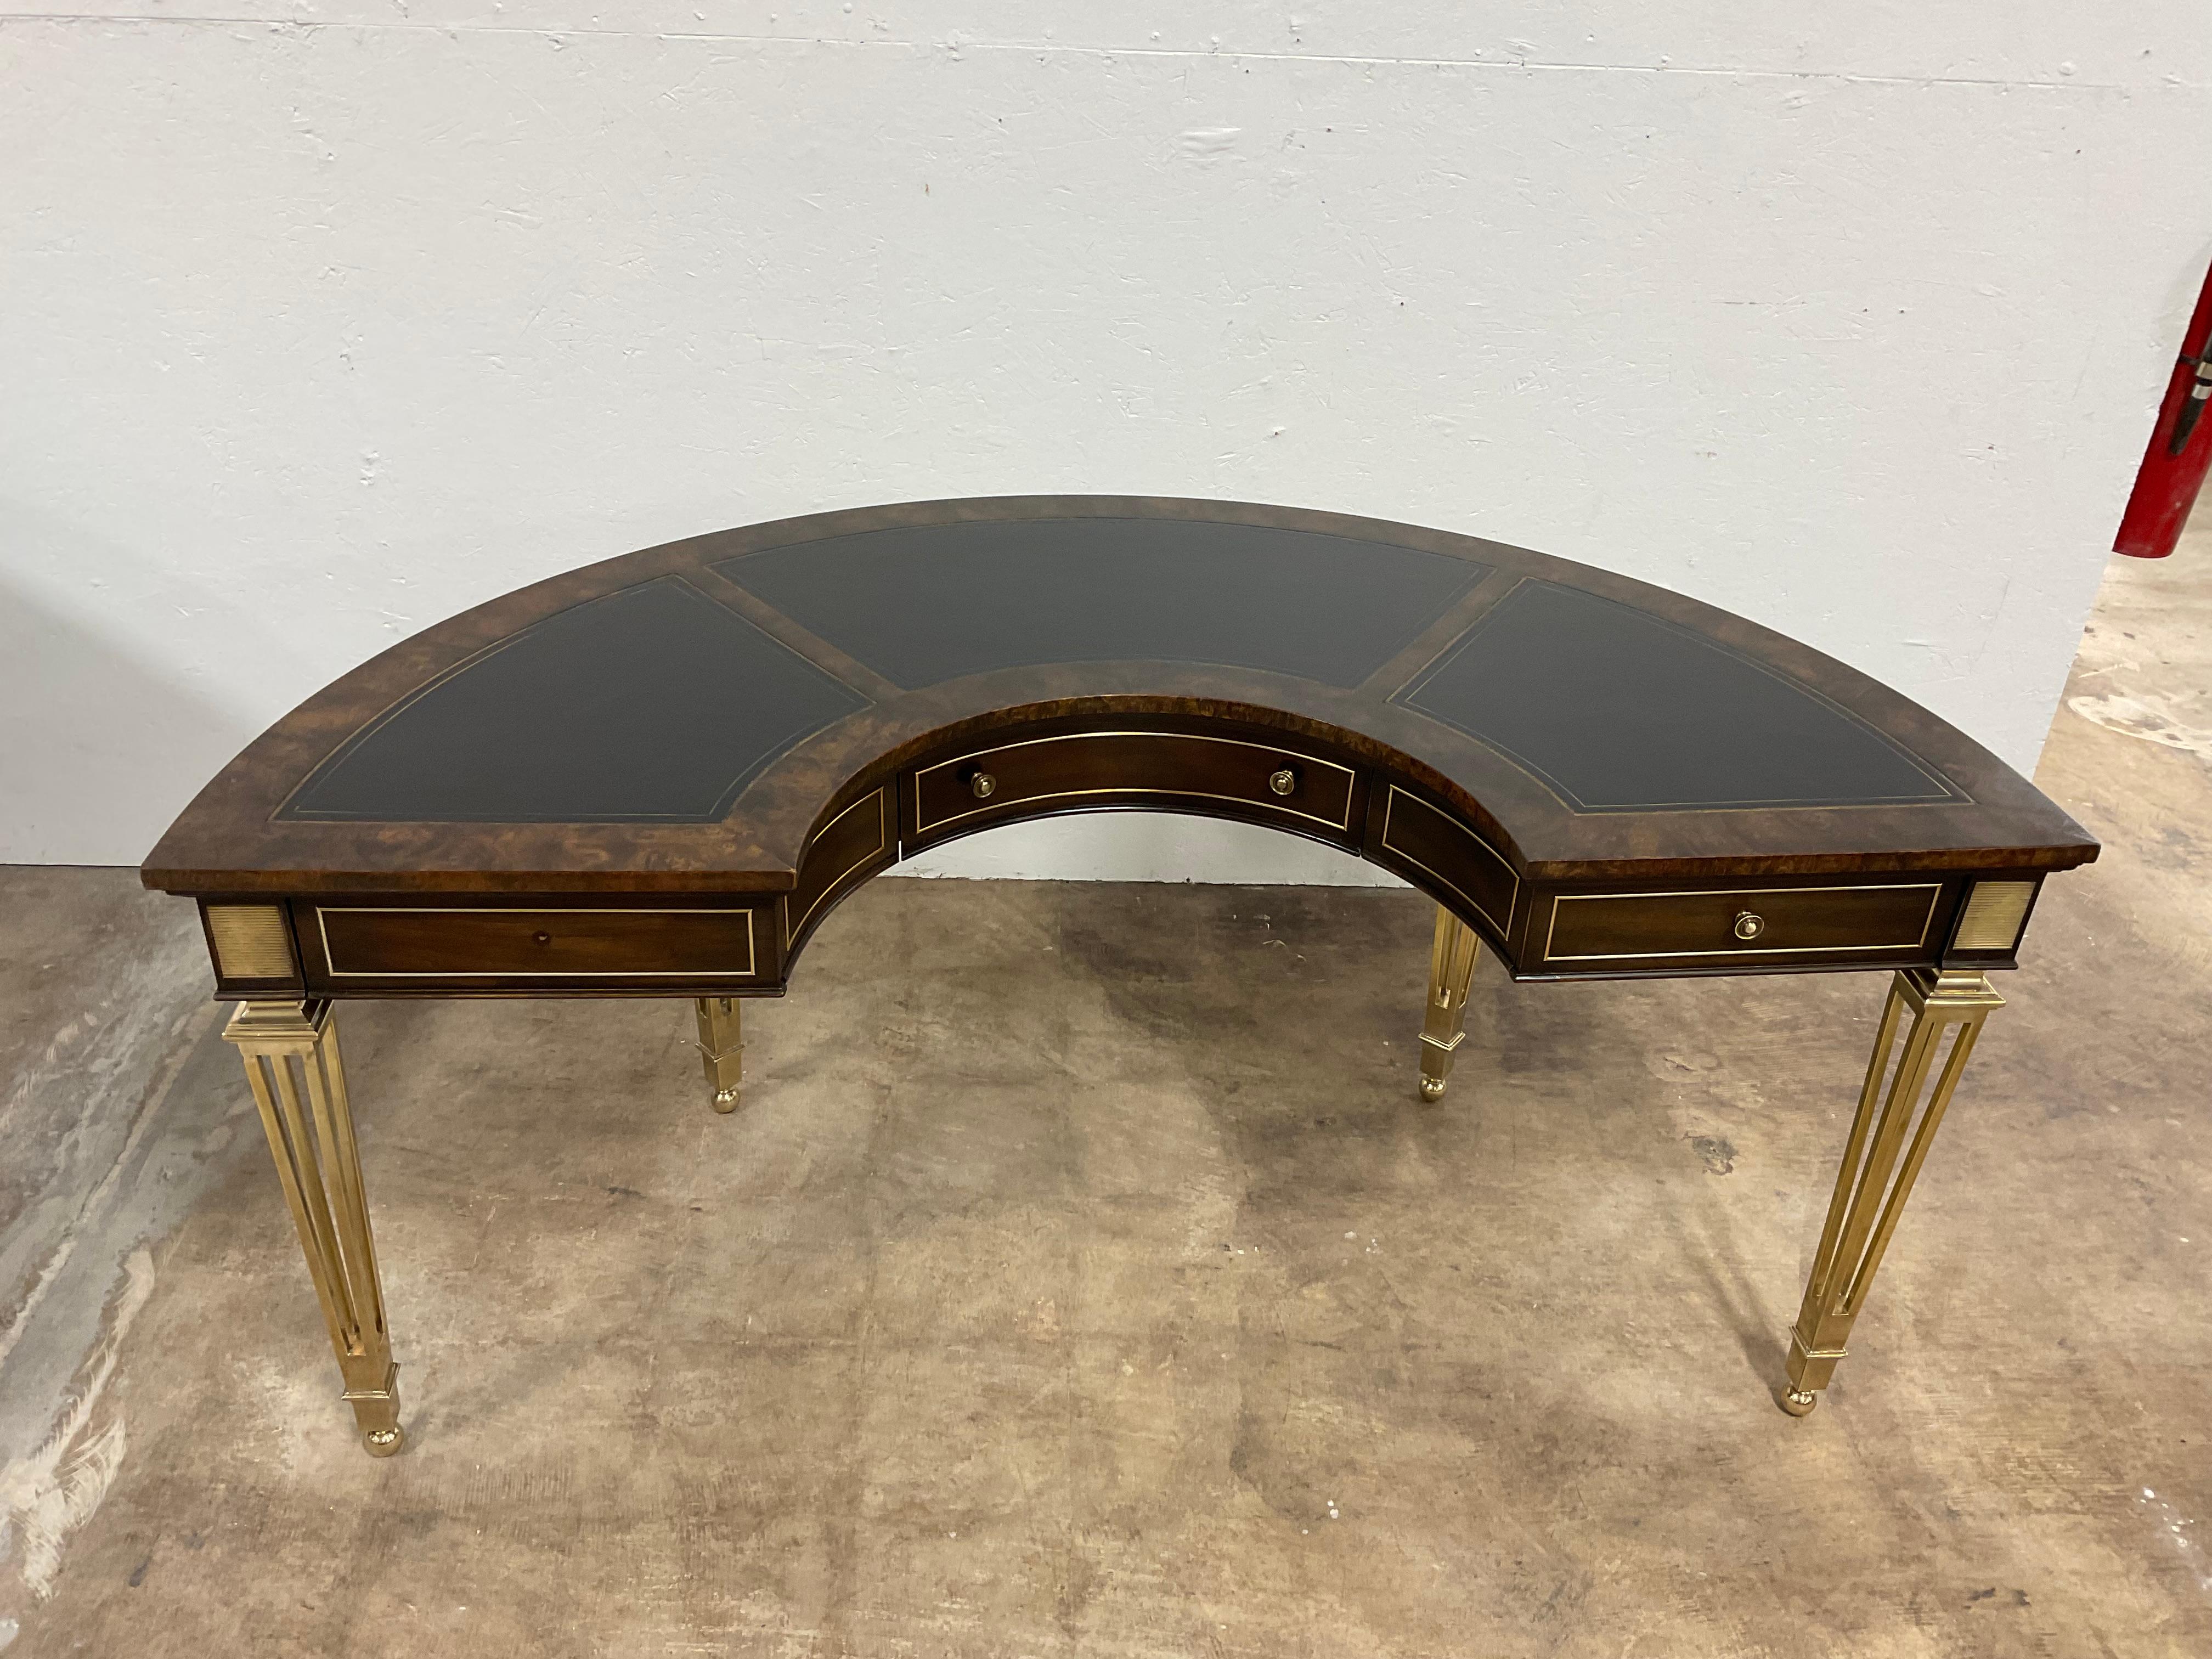 Good looking semicircular desk by  Mastercraft. ( no label)  Their pieces are very distinctive, and easily recognizable. Solid brass , open legs with Amboyna wood top , and black leather work surfaces. 3 drawers across the top with brass hardware.